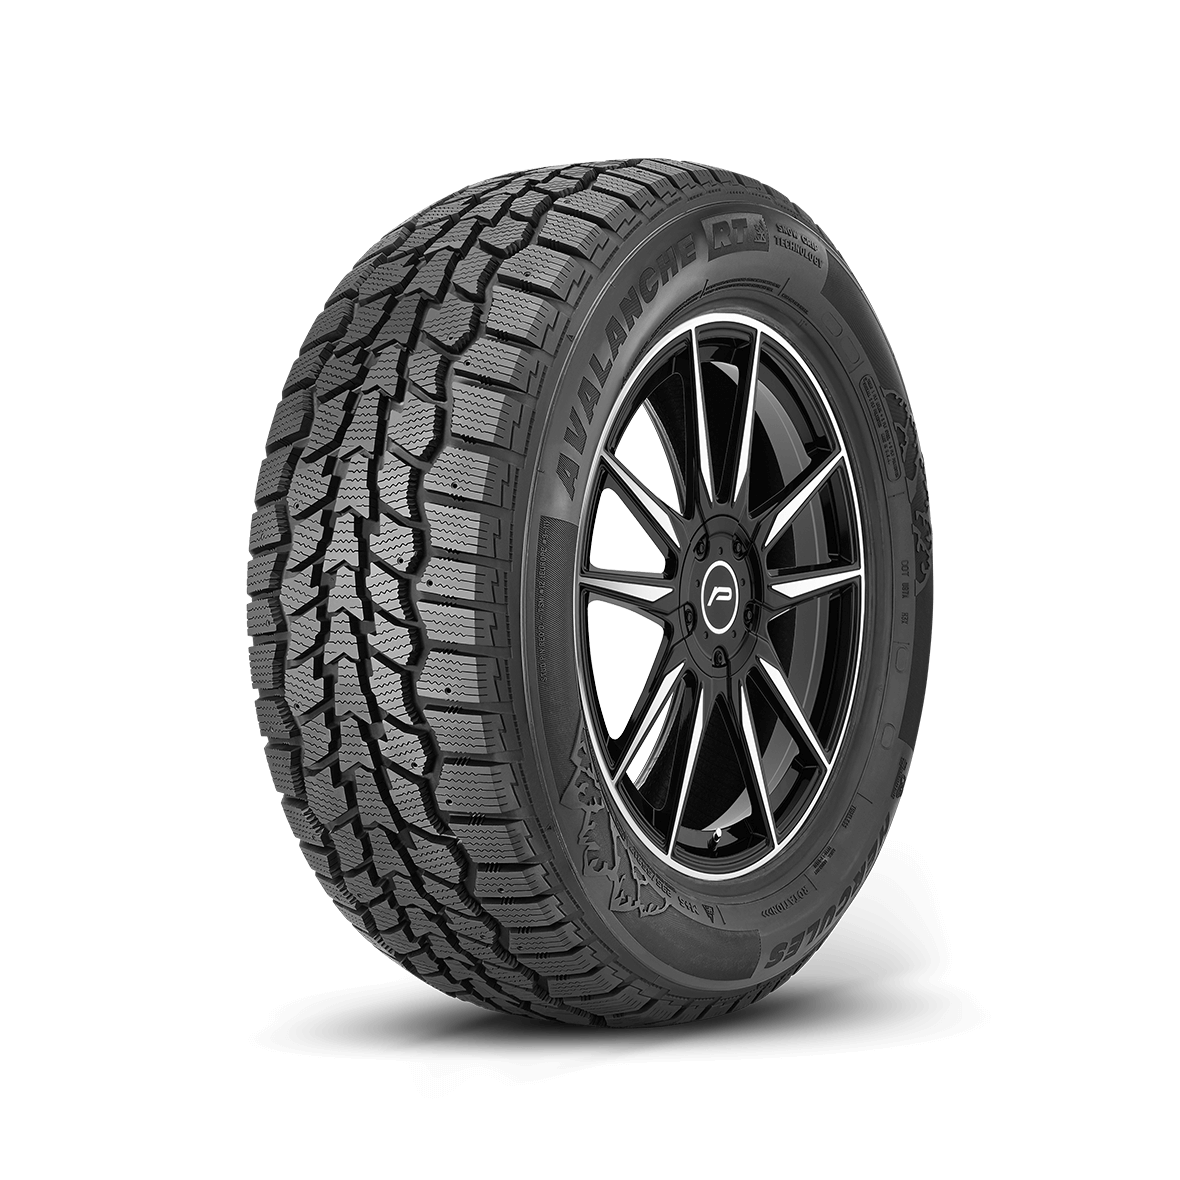 Avalanche® RT | Tires by Name